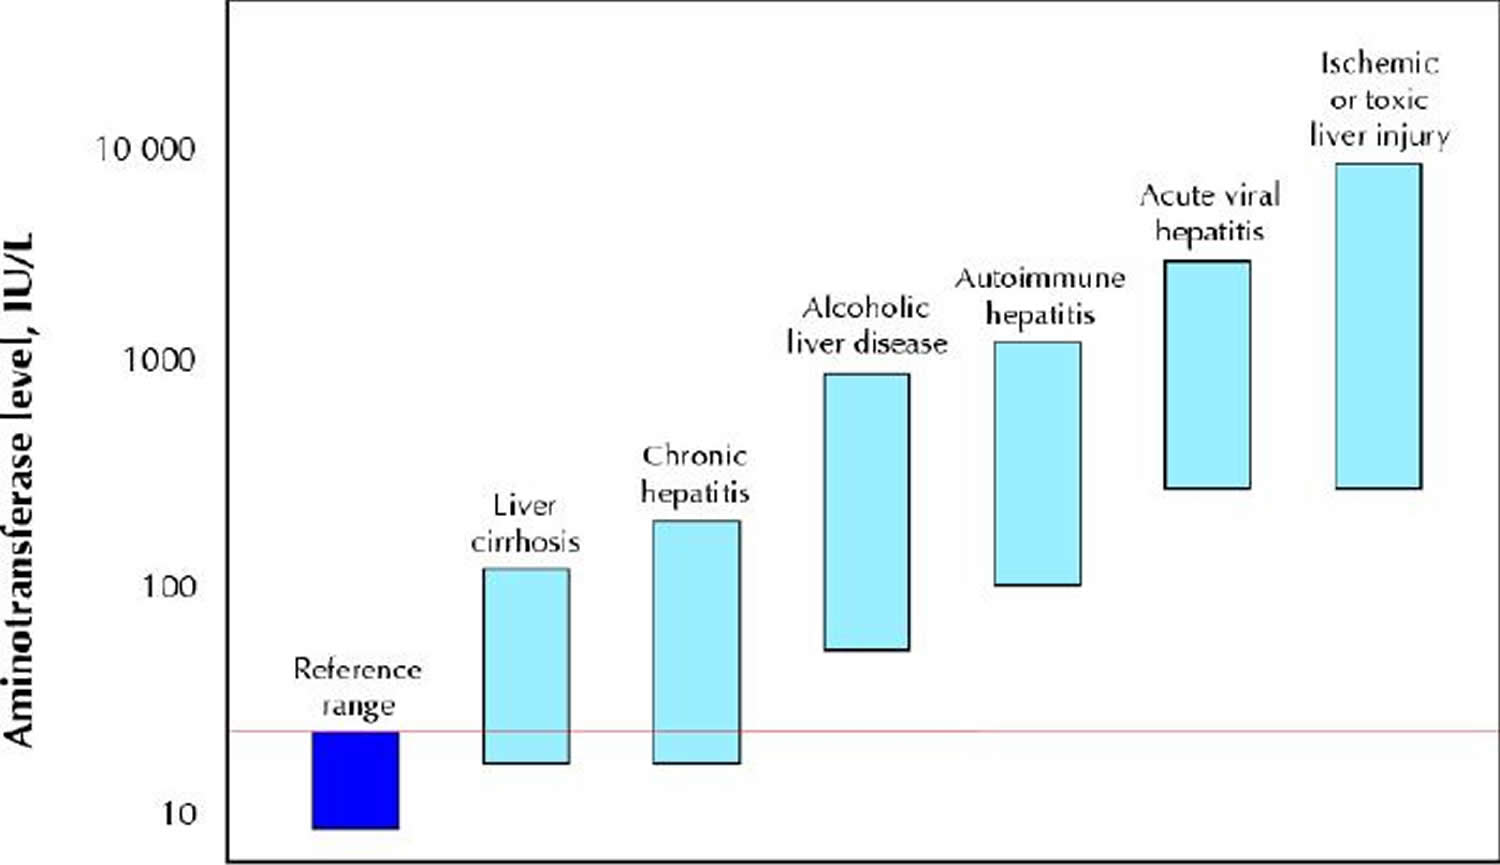 Serum aminotransferase levels in various liver diseases